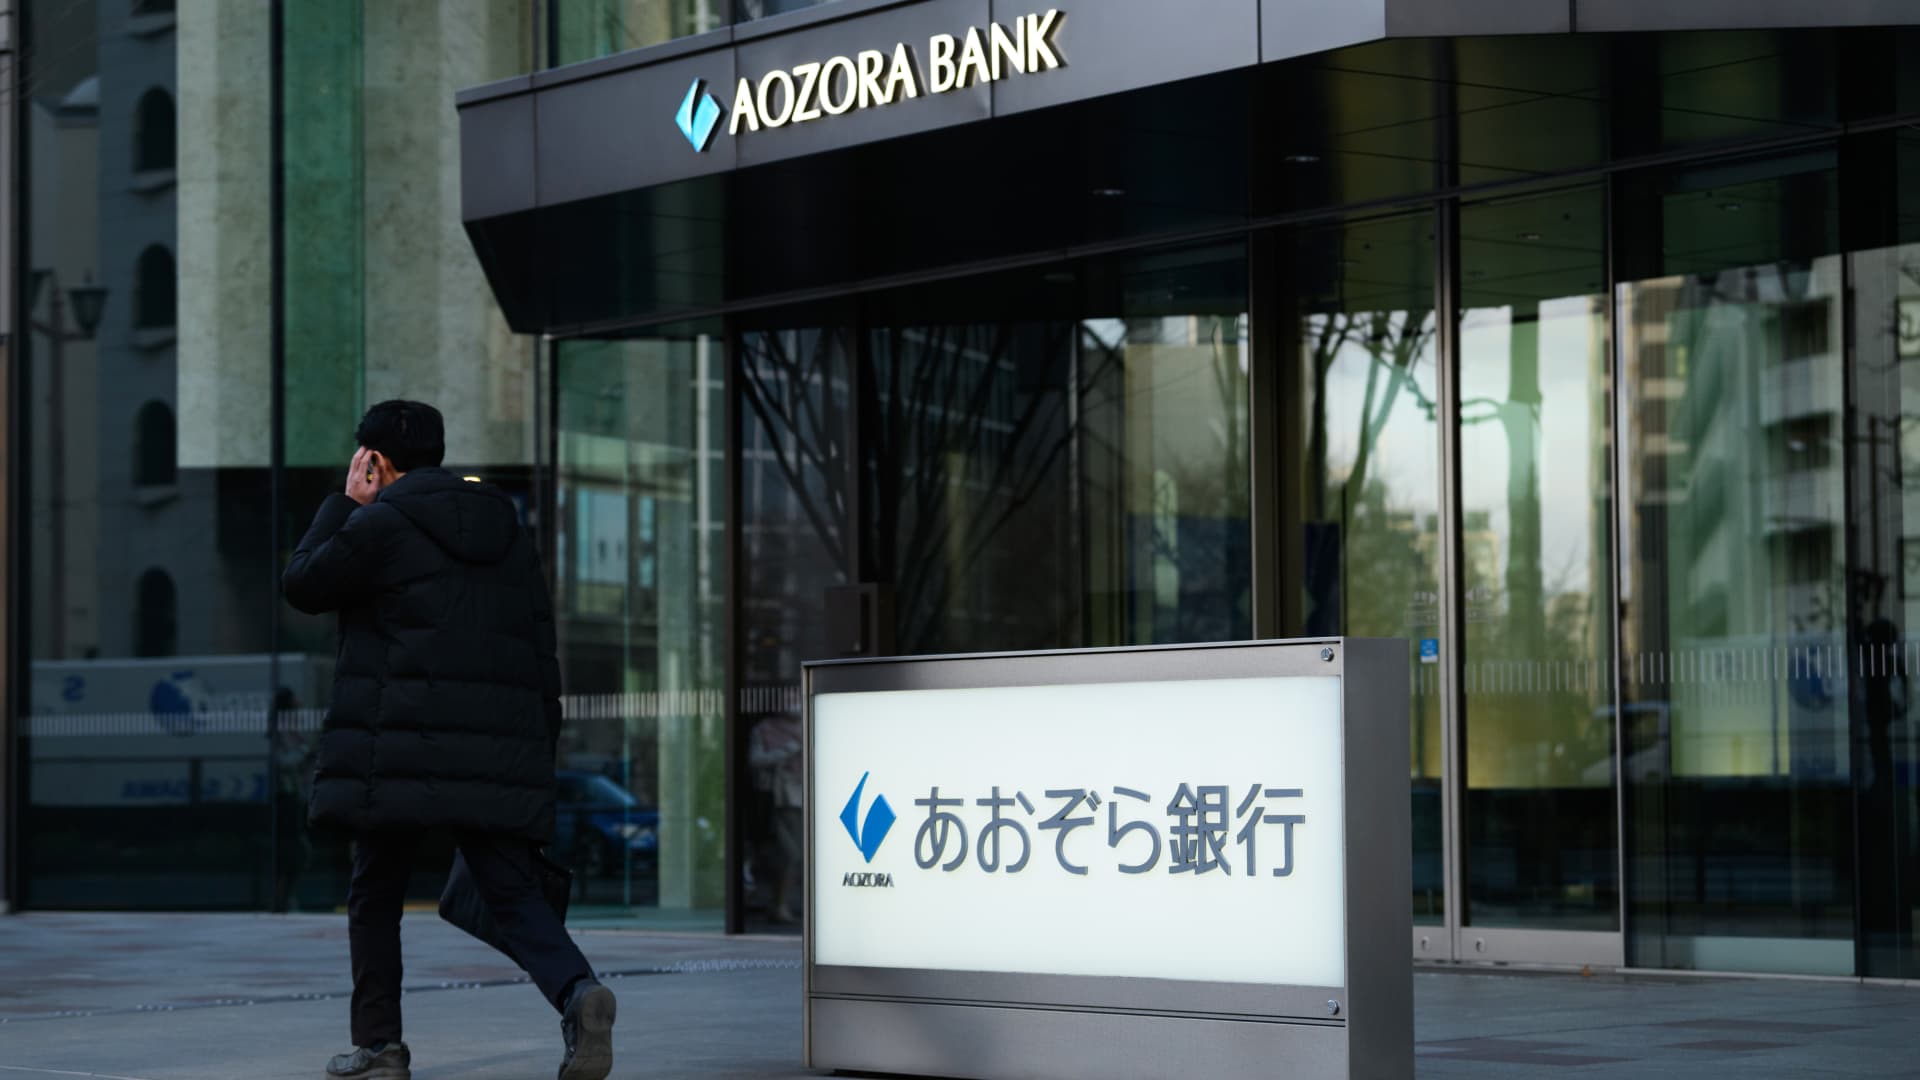 Japan's Aozora Bank shares hit near 3-year lows on U.S. commercial property losses